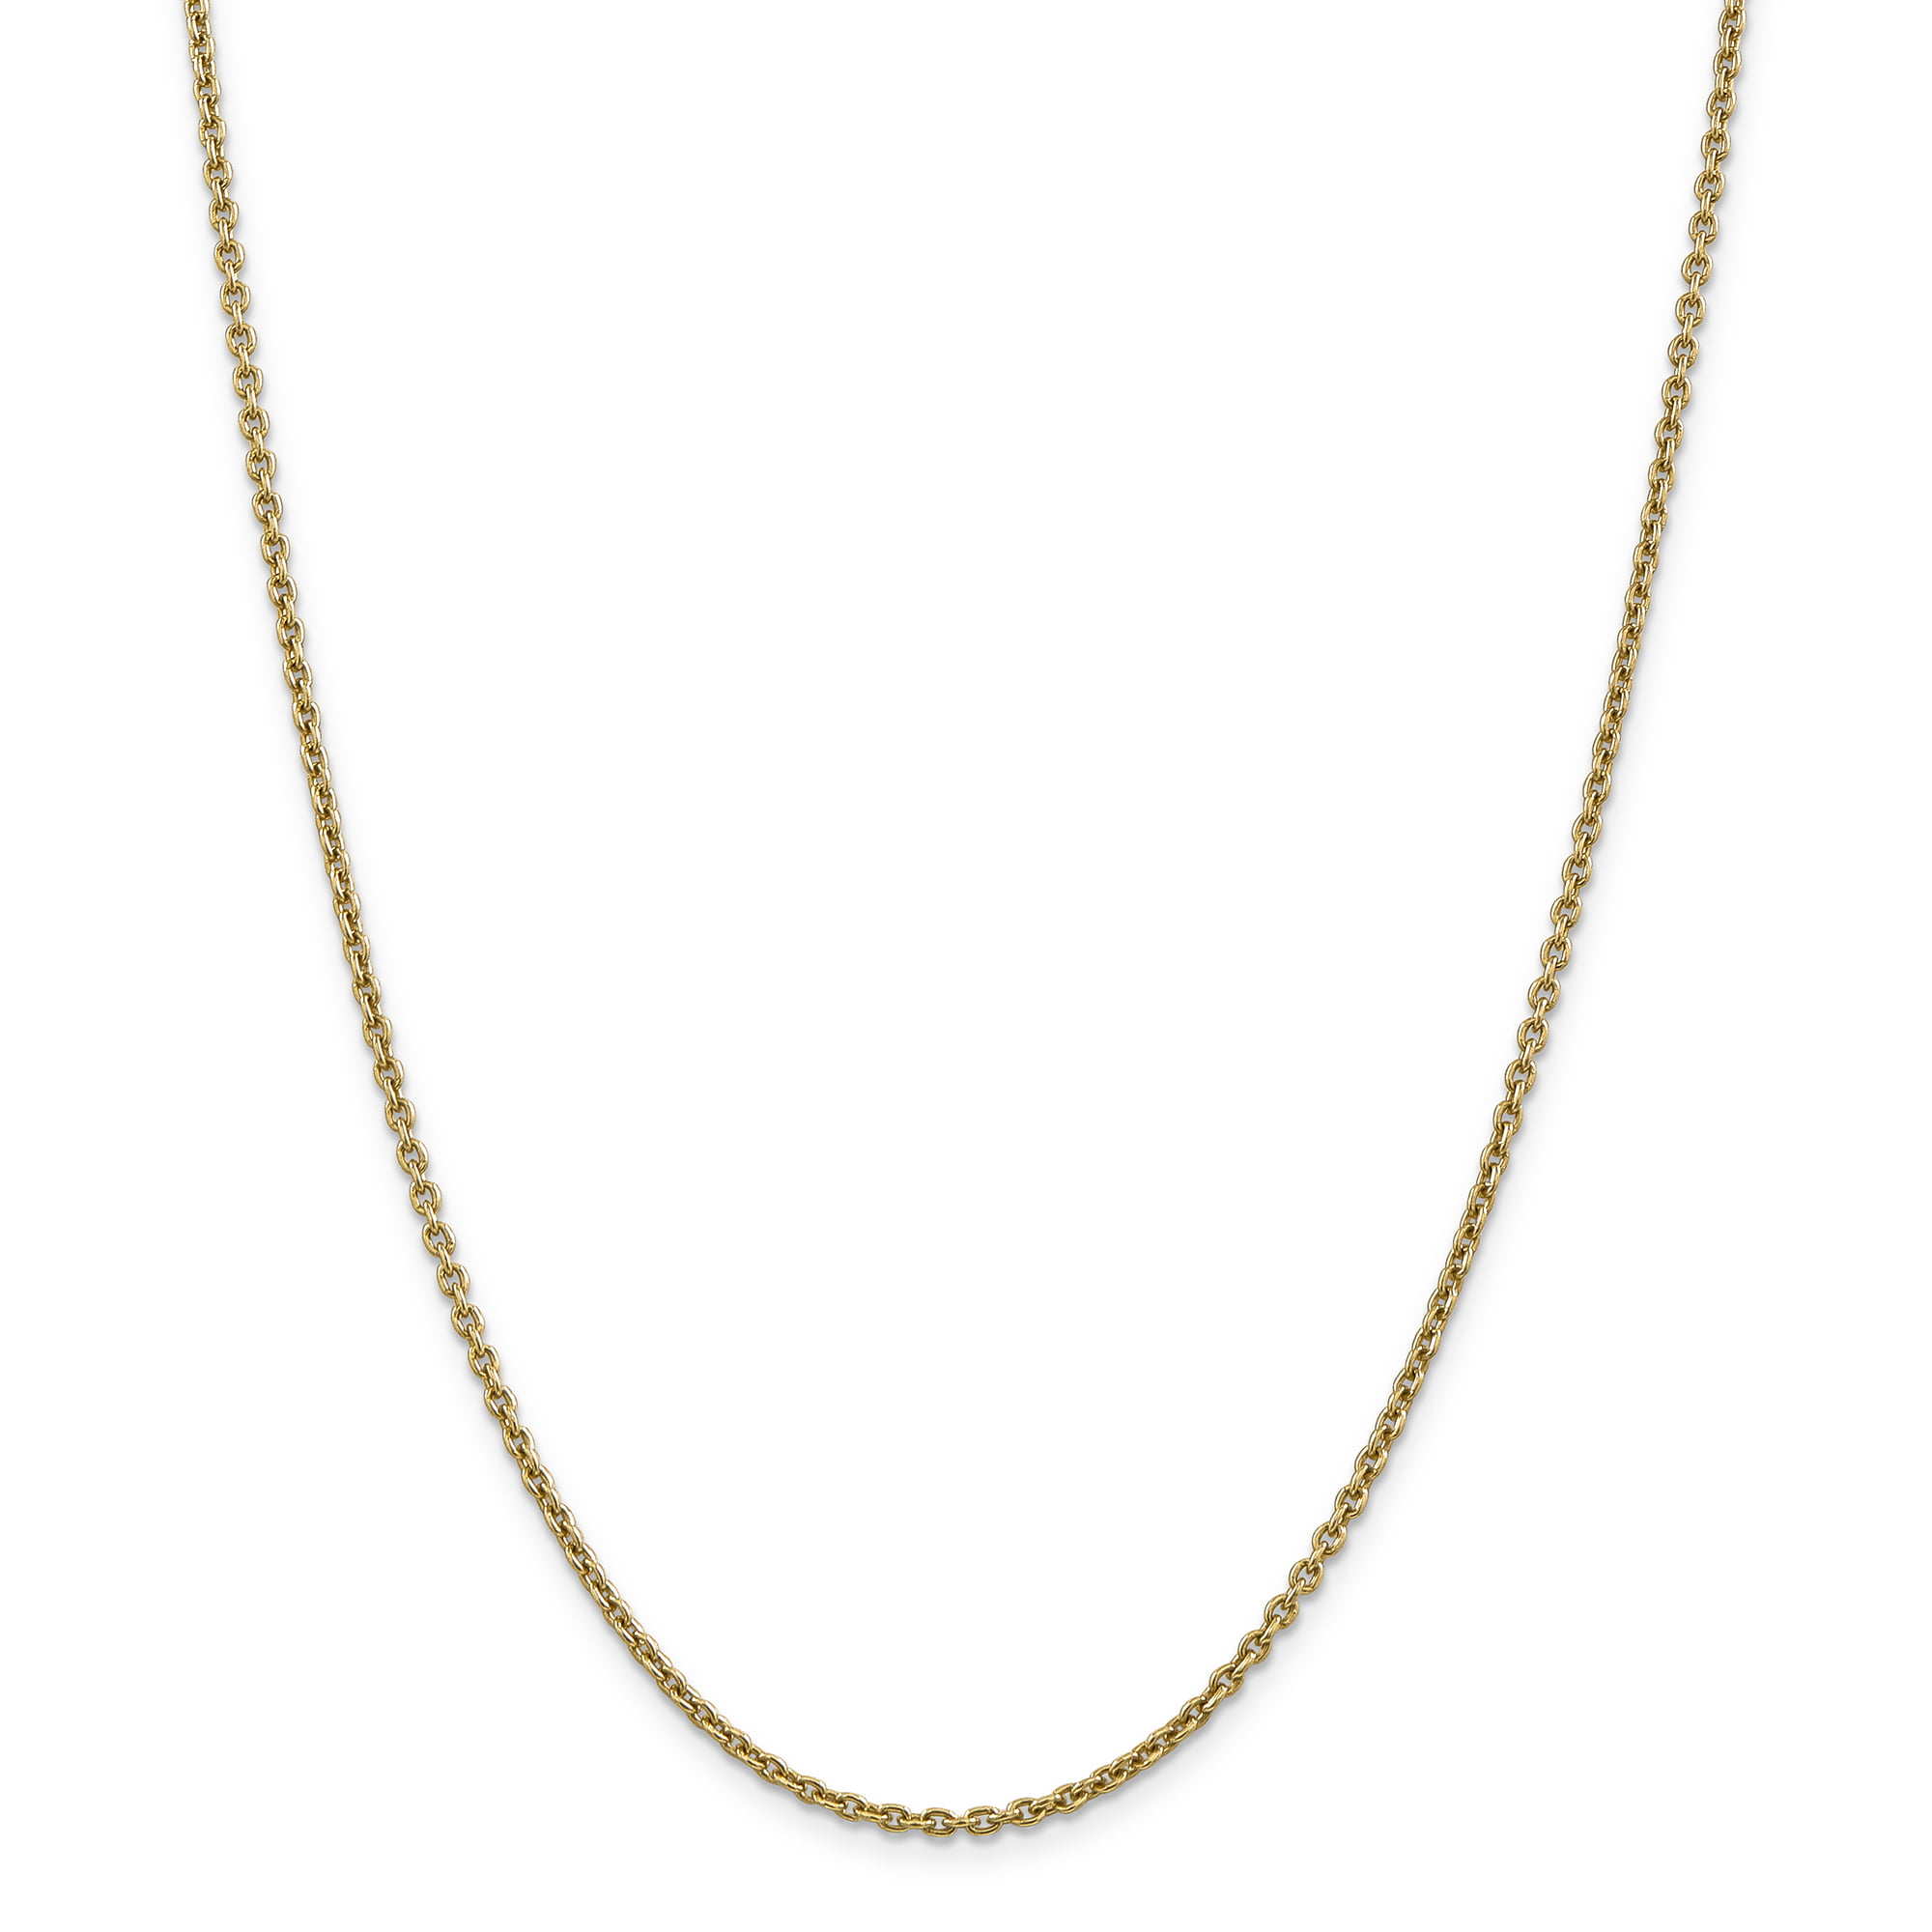 Roy Rose Jewelry 14K Yellow Gold .75mm Solid Polished Cable Chain Anklet ~ Length 9 inches 